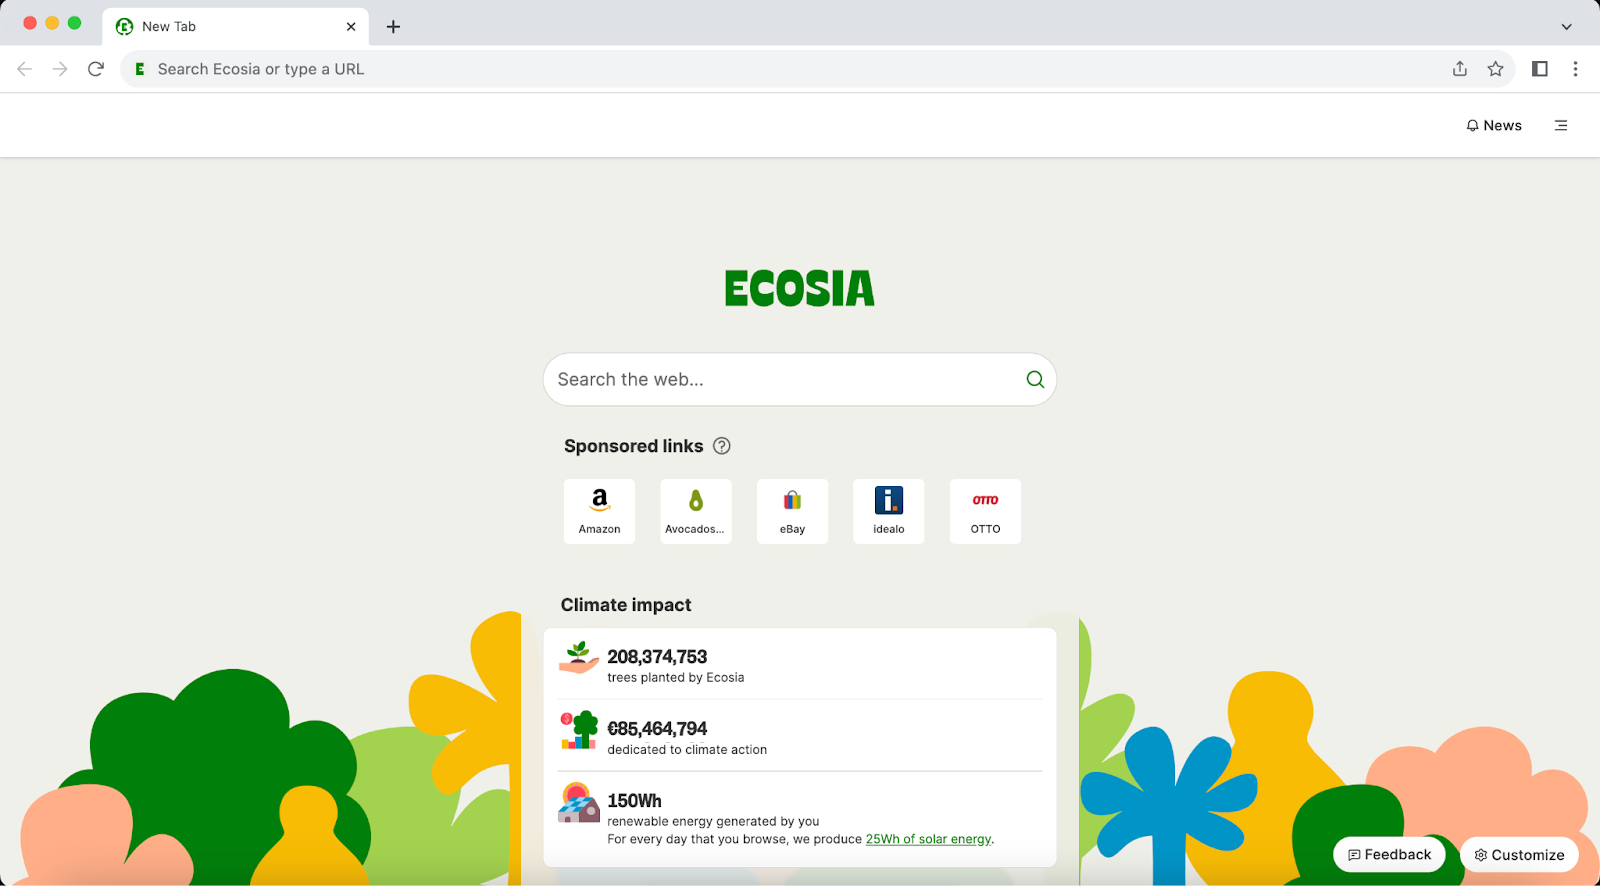 Screenshot of Ecosia New tab page, where one can see the setup, including 6 sponsored links pages like Amazon, Patagonia, and more. 